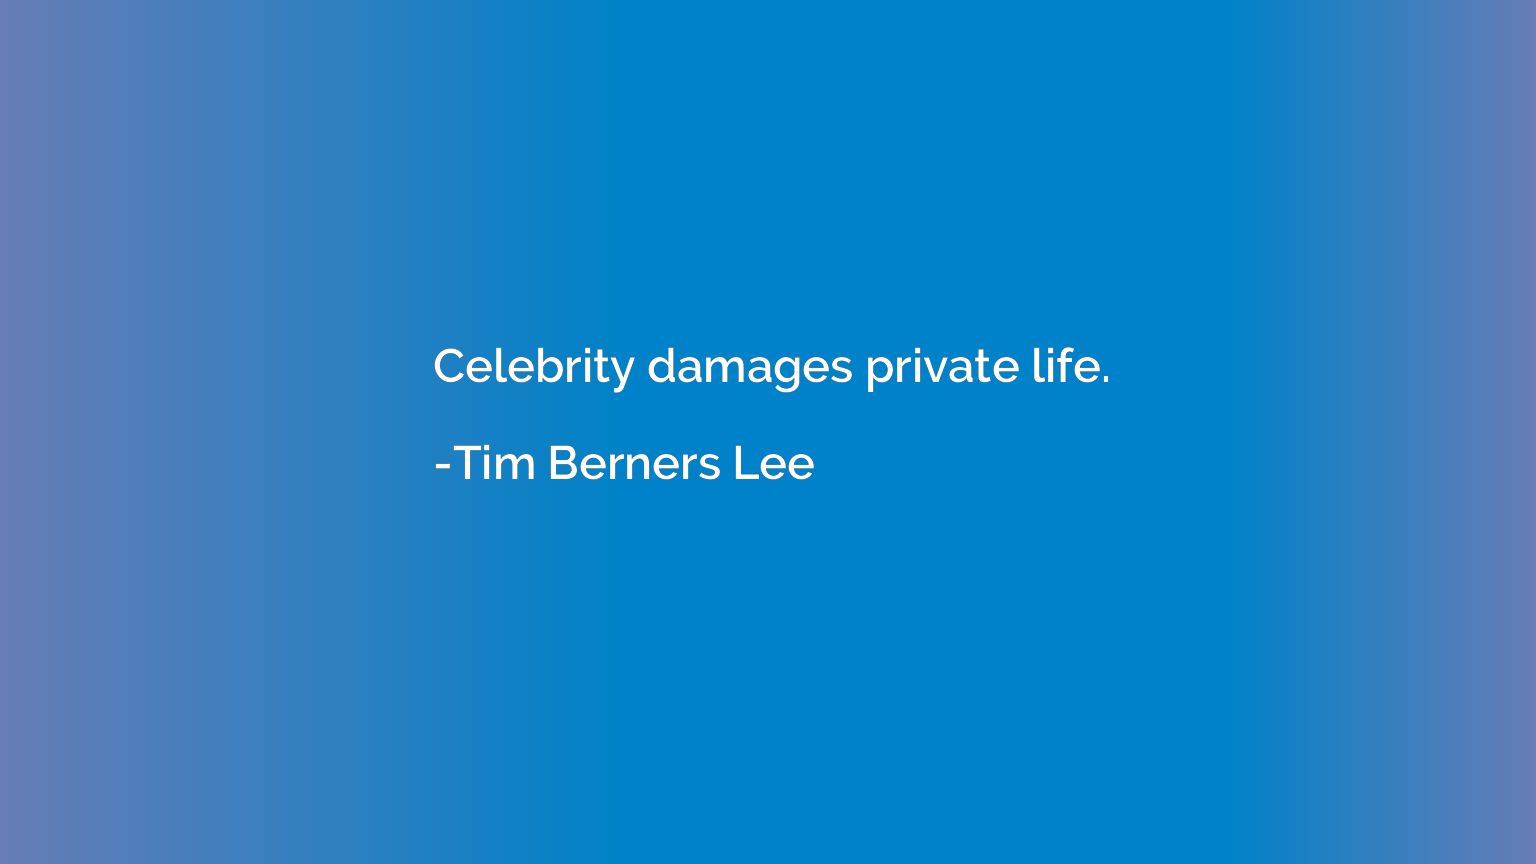 Celebrity damages private life.